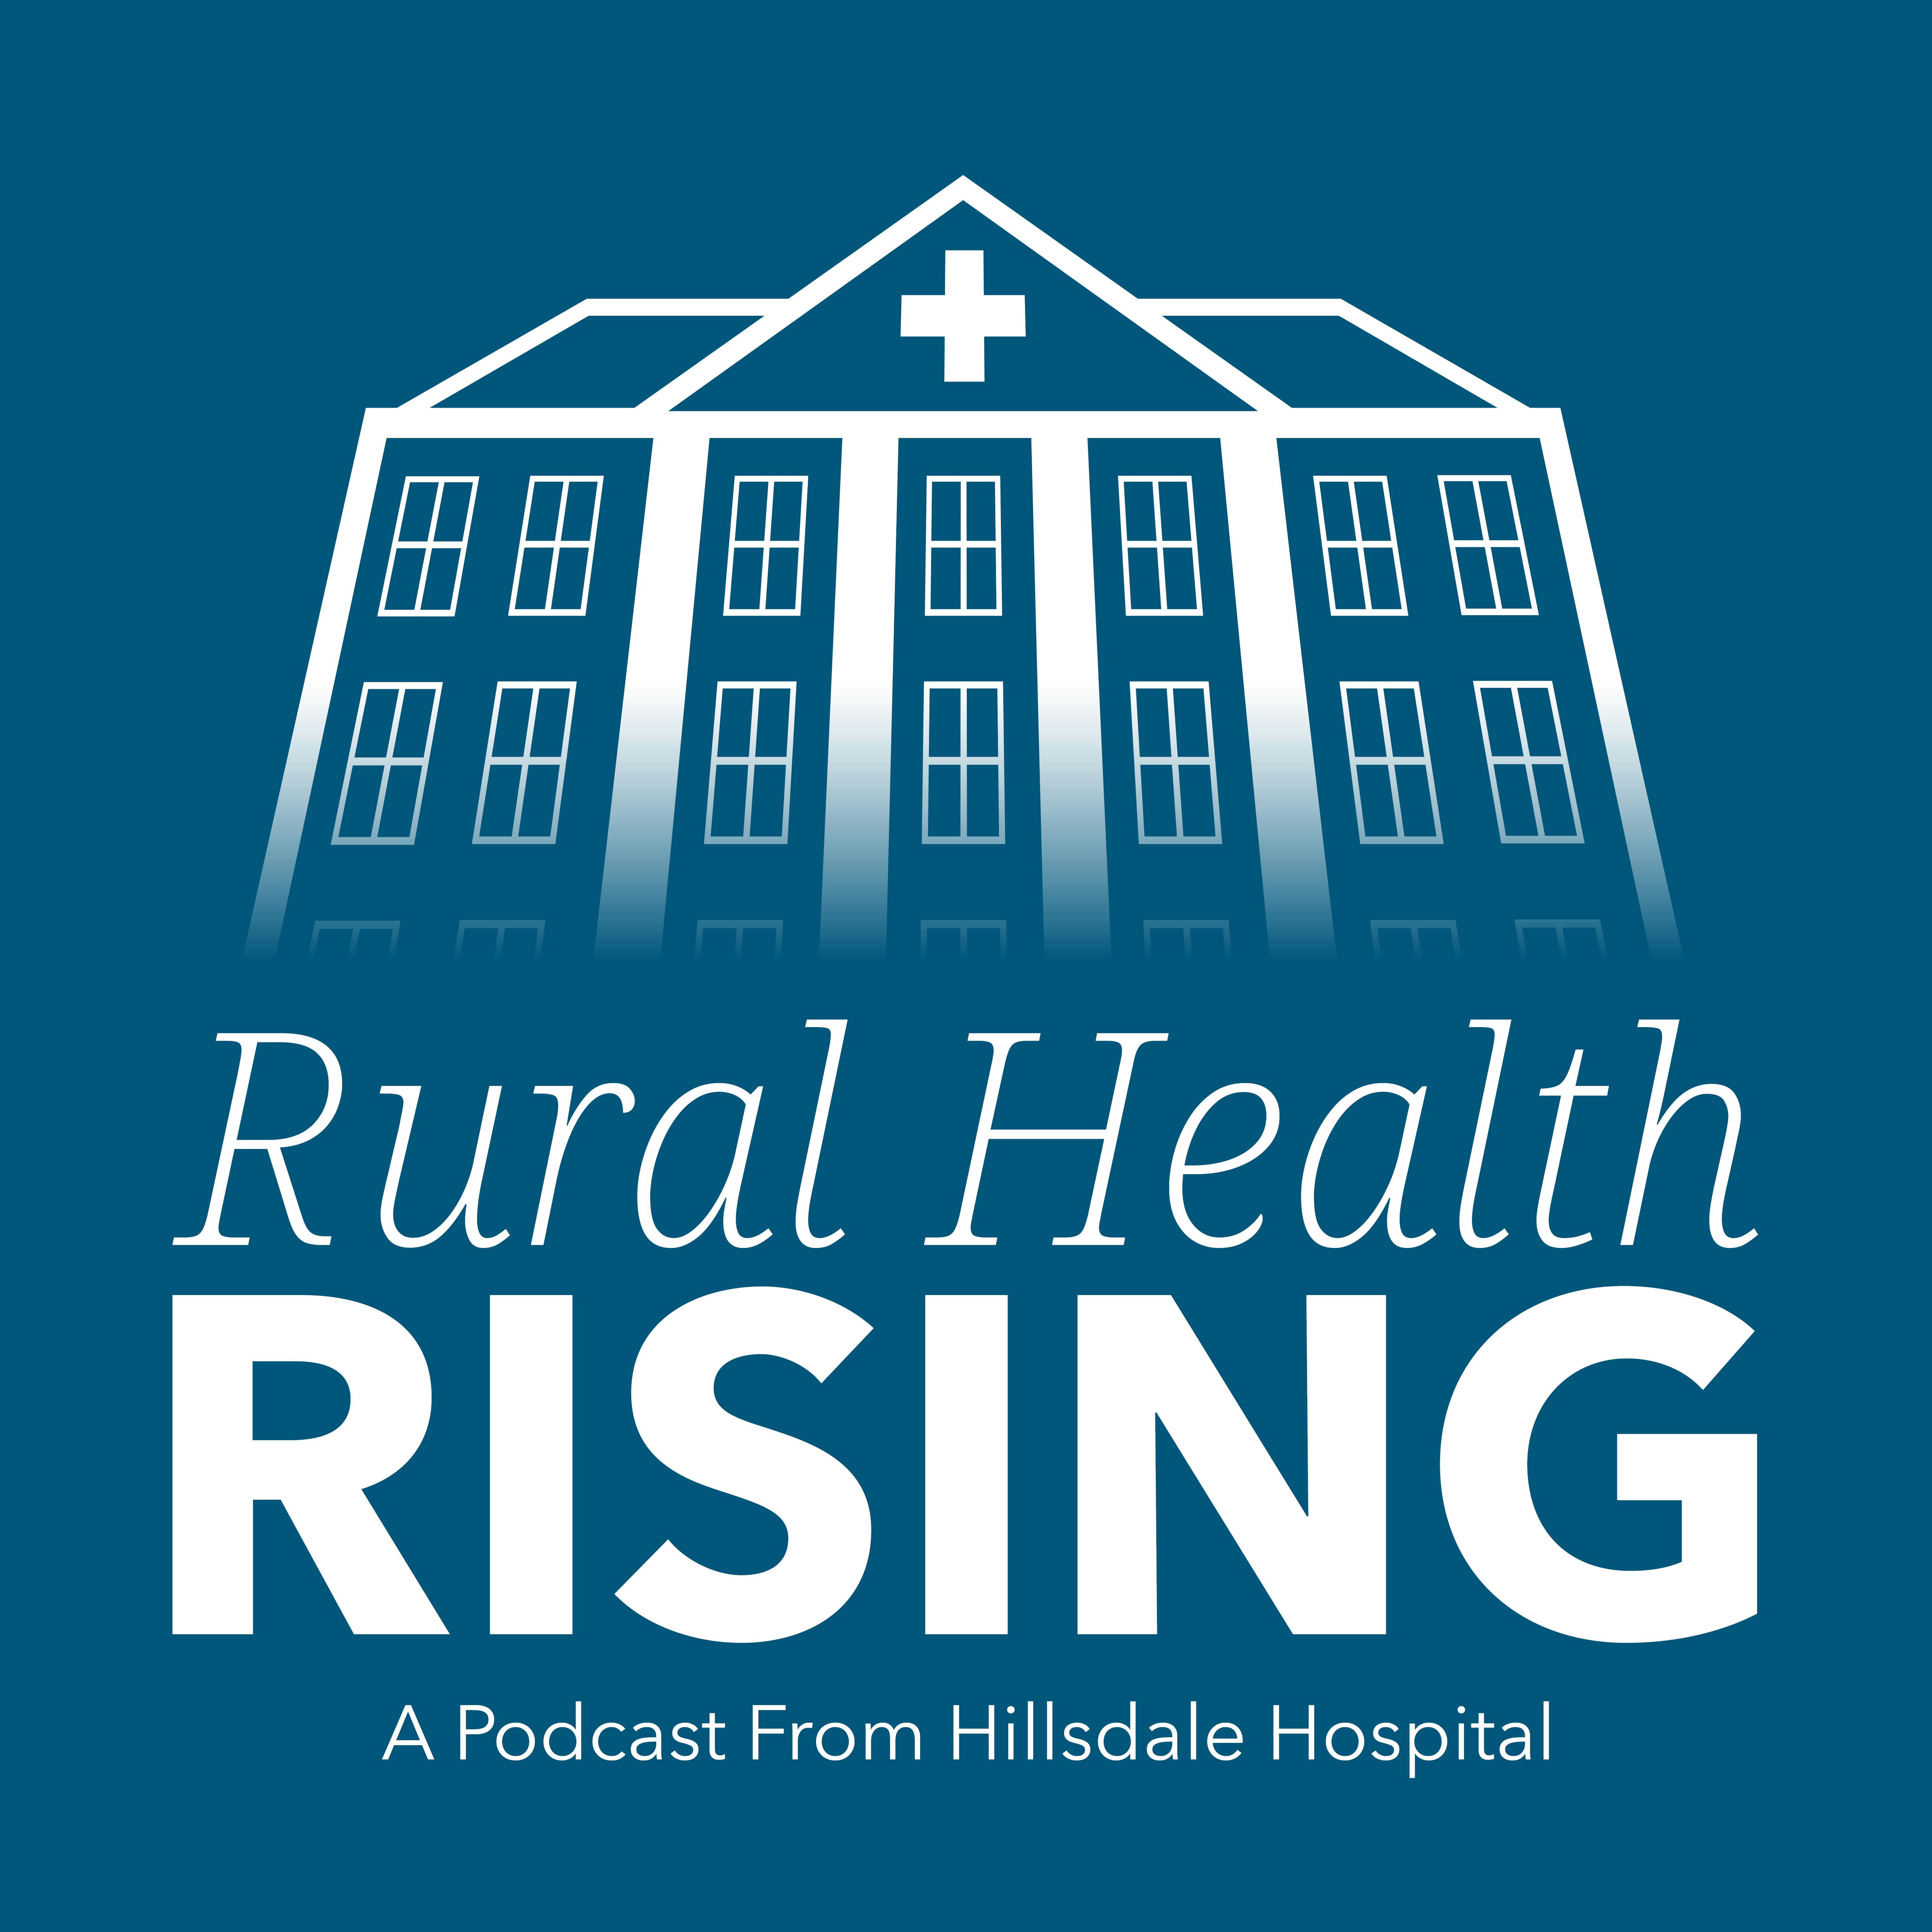 Episode 151: Rural Health Road Trip: The Last Frontier State